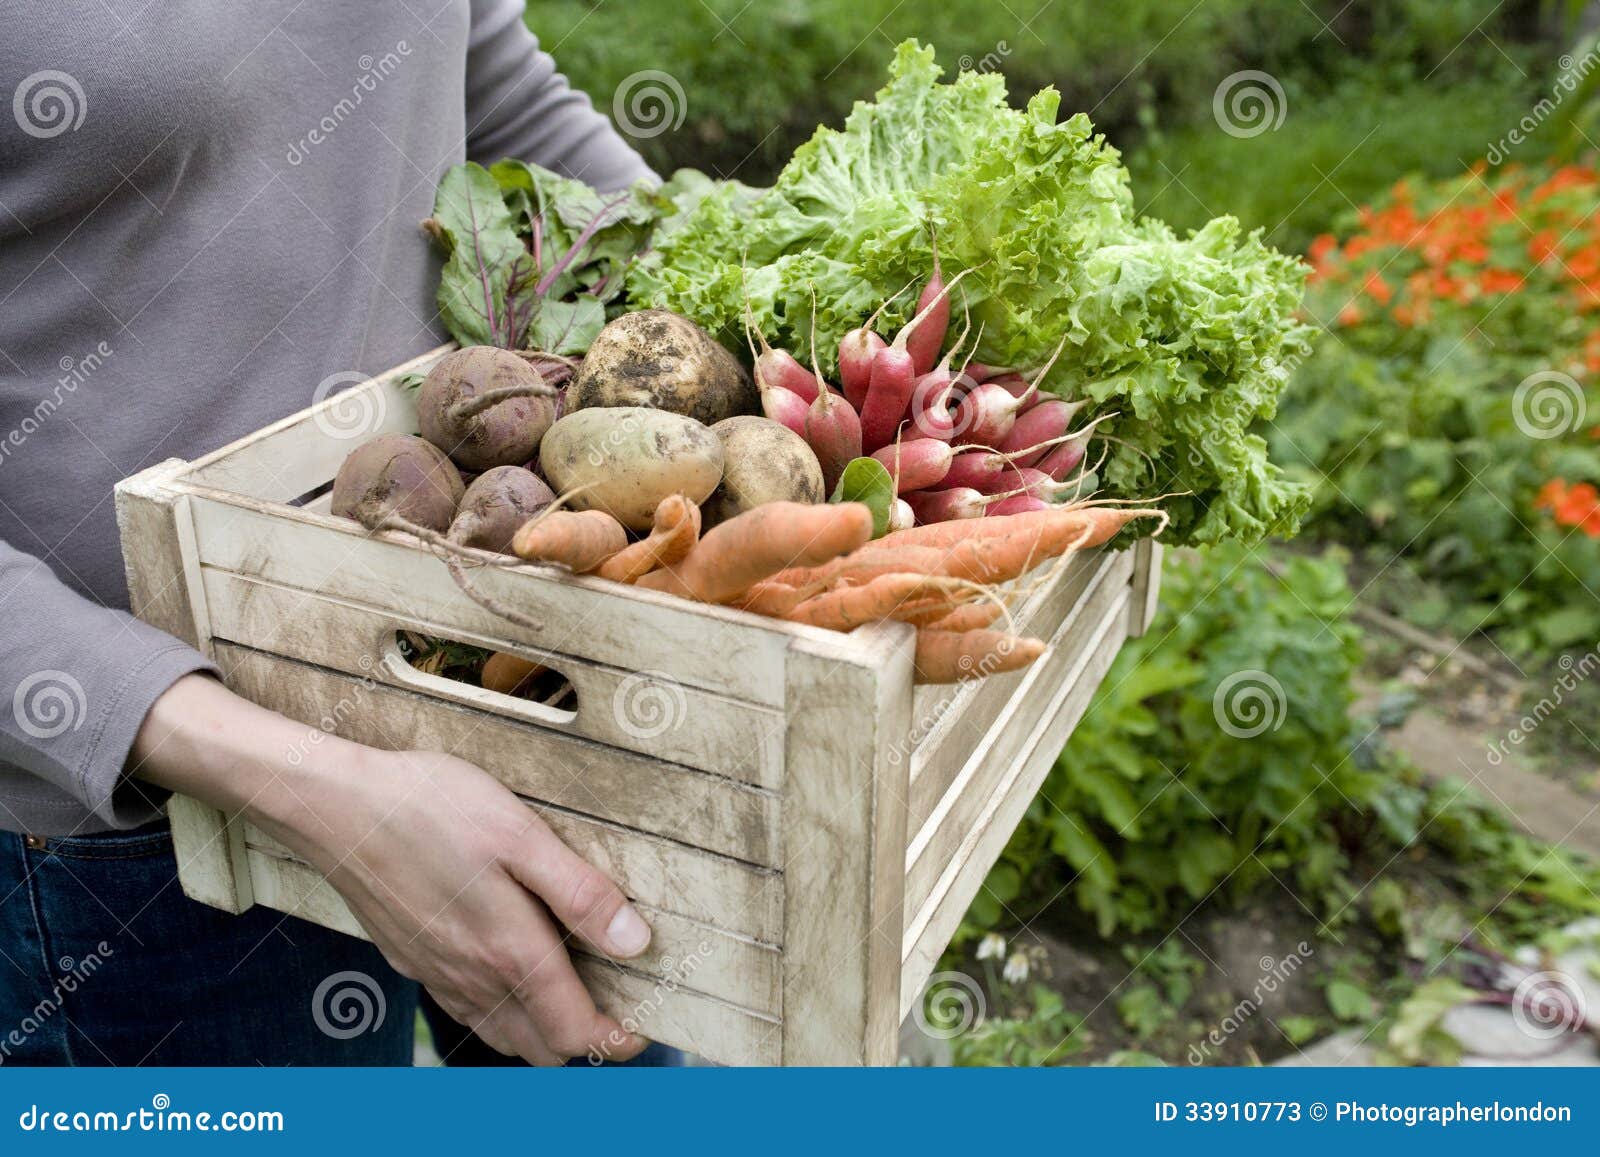 Midsection of woman carrying crate with freshly harvested vegetables in garden